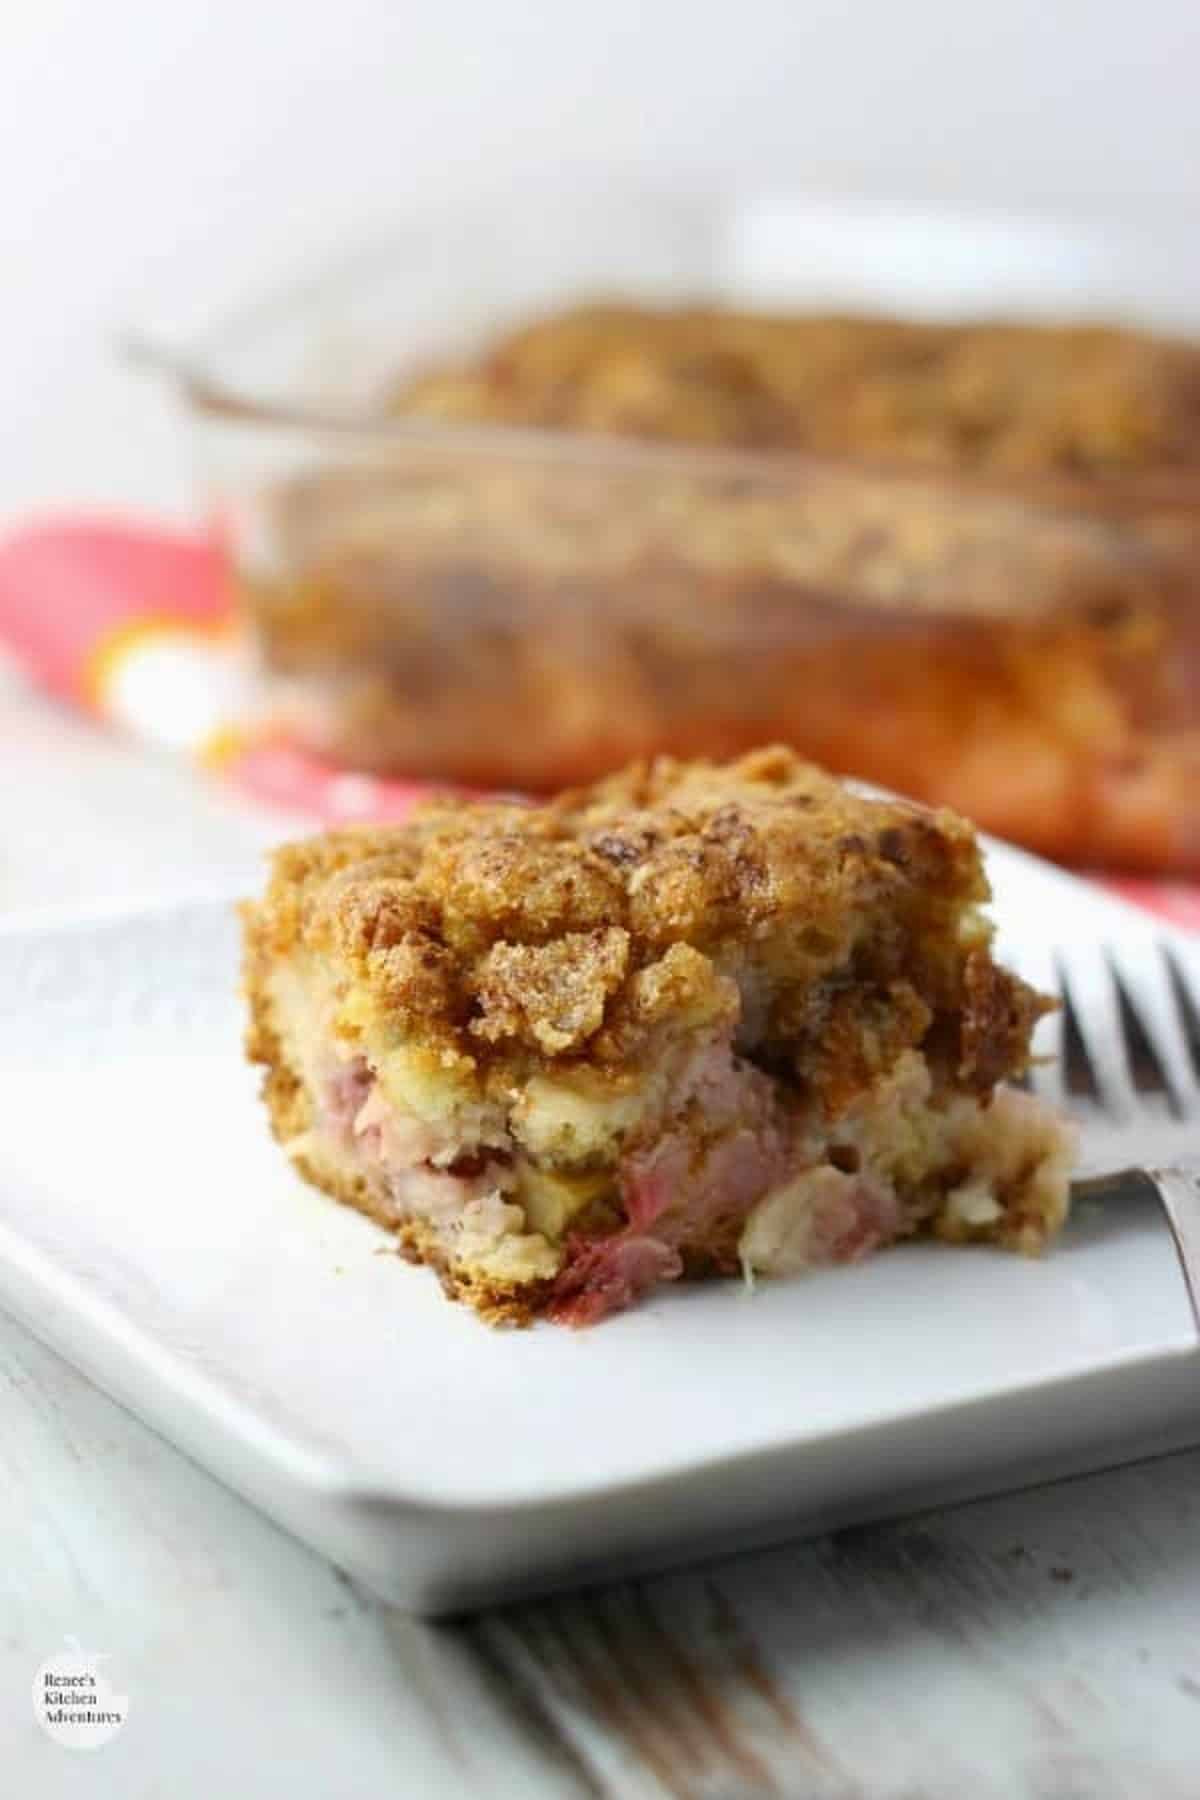 Strawberry Rhubarb Crunch Cake served on a white plate with fork.